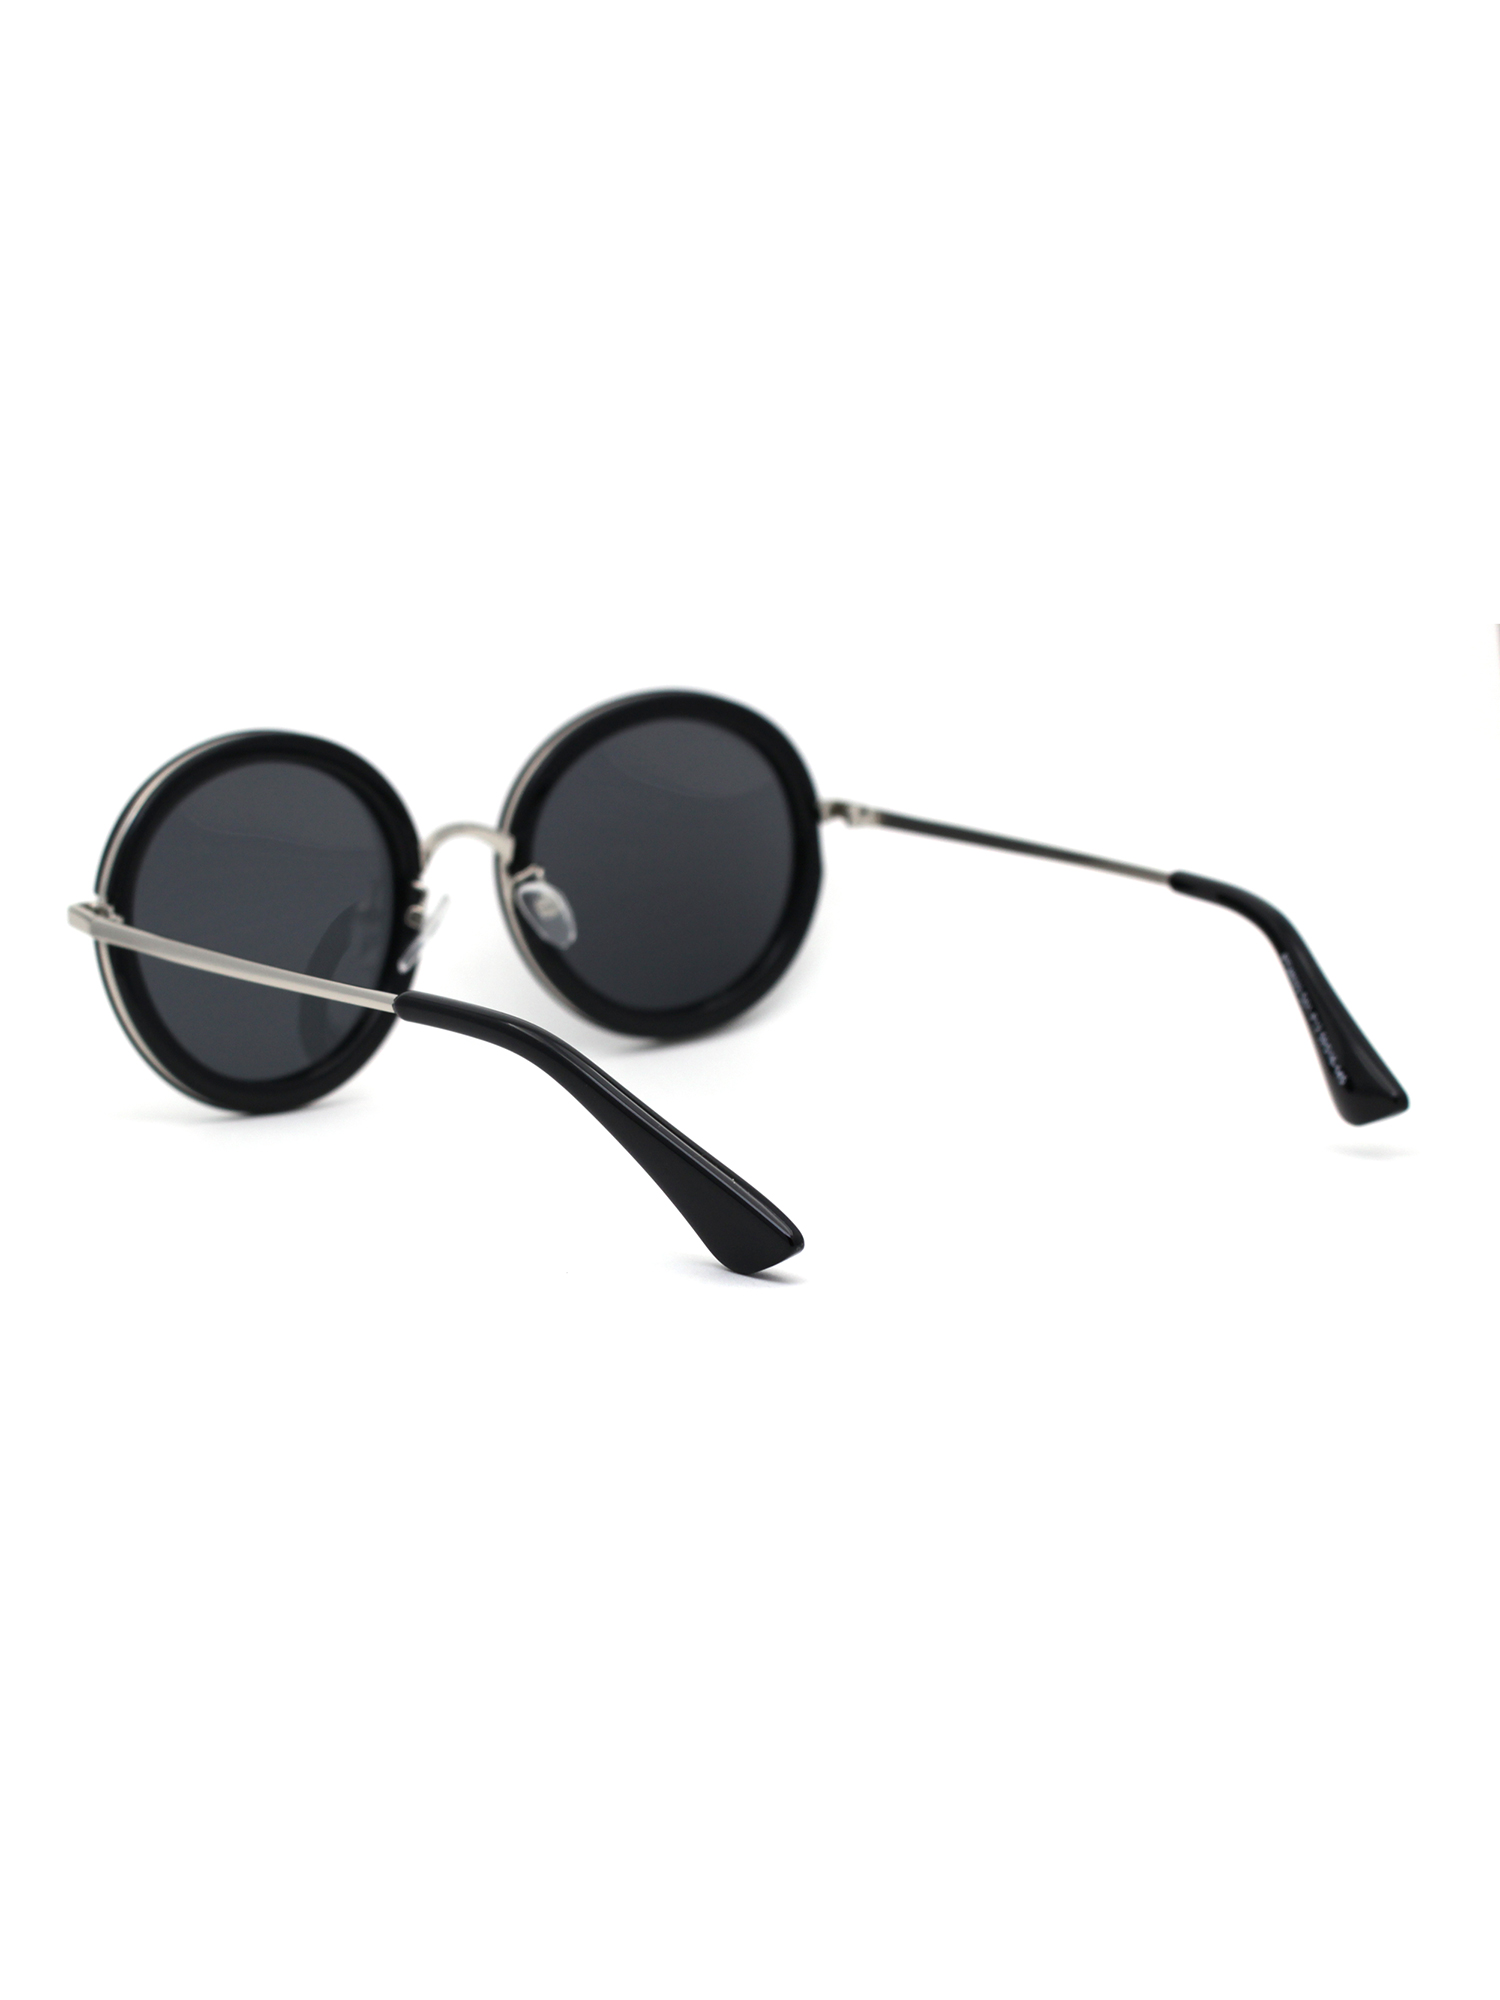 Womens Round Polarized Double Rim Circle Lens Sunglasses Silver Black Solid Black - image 4 of 4